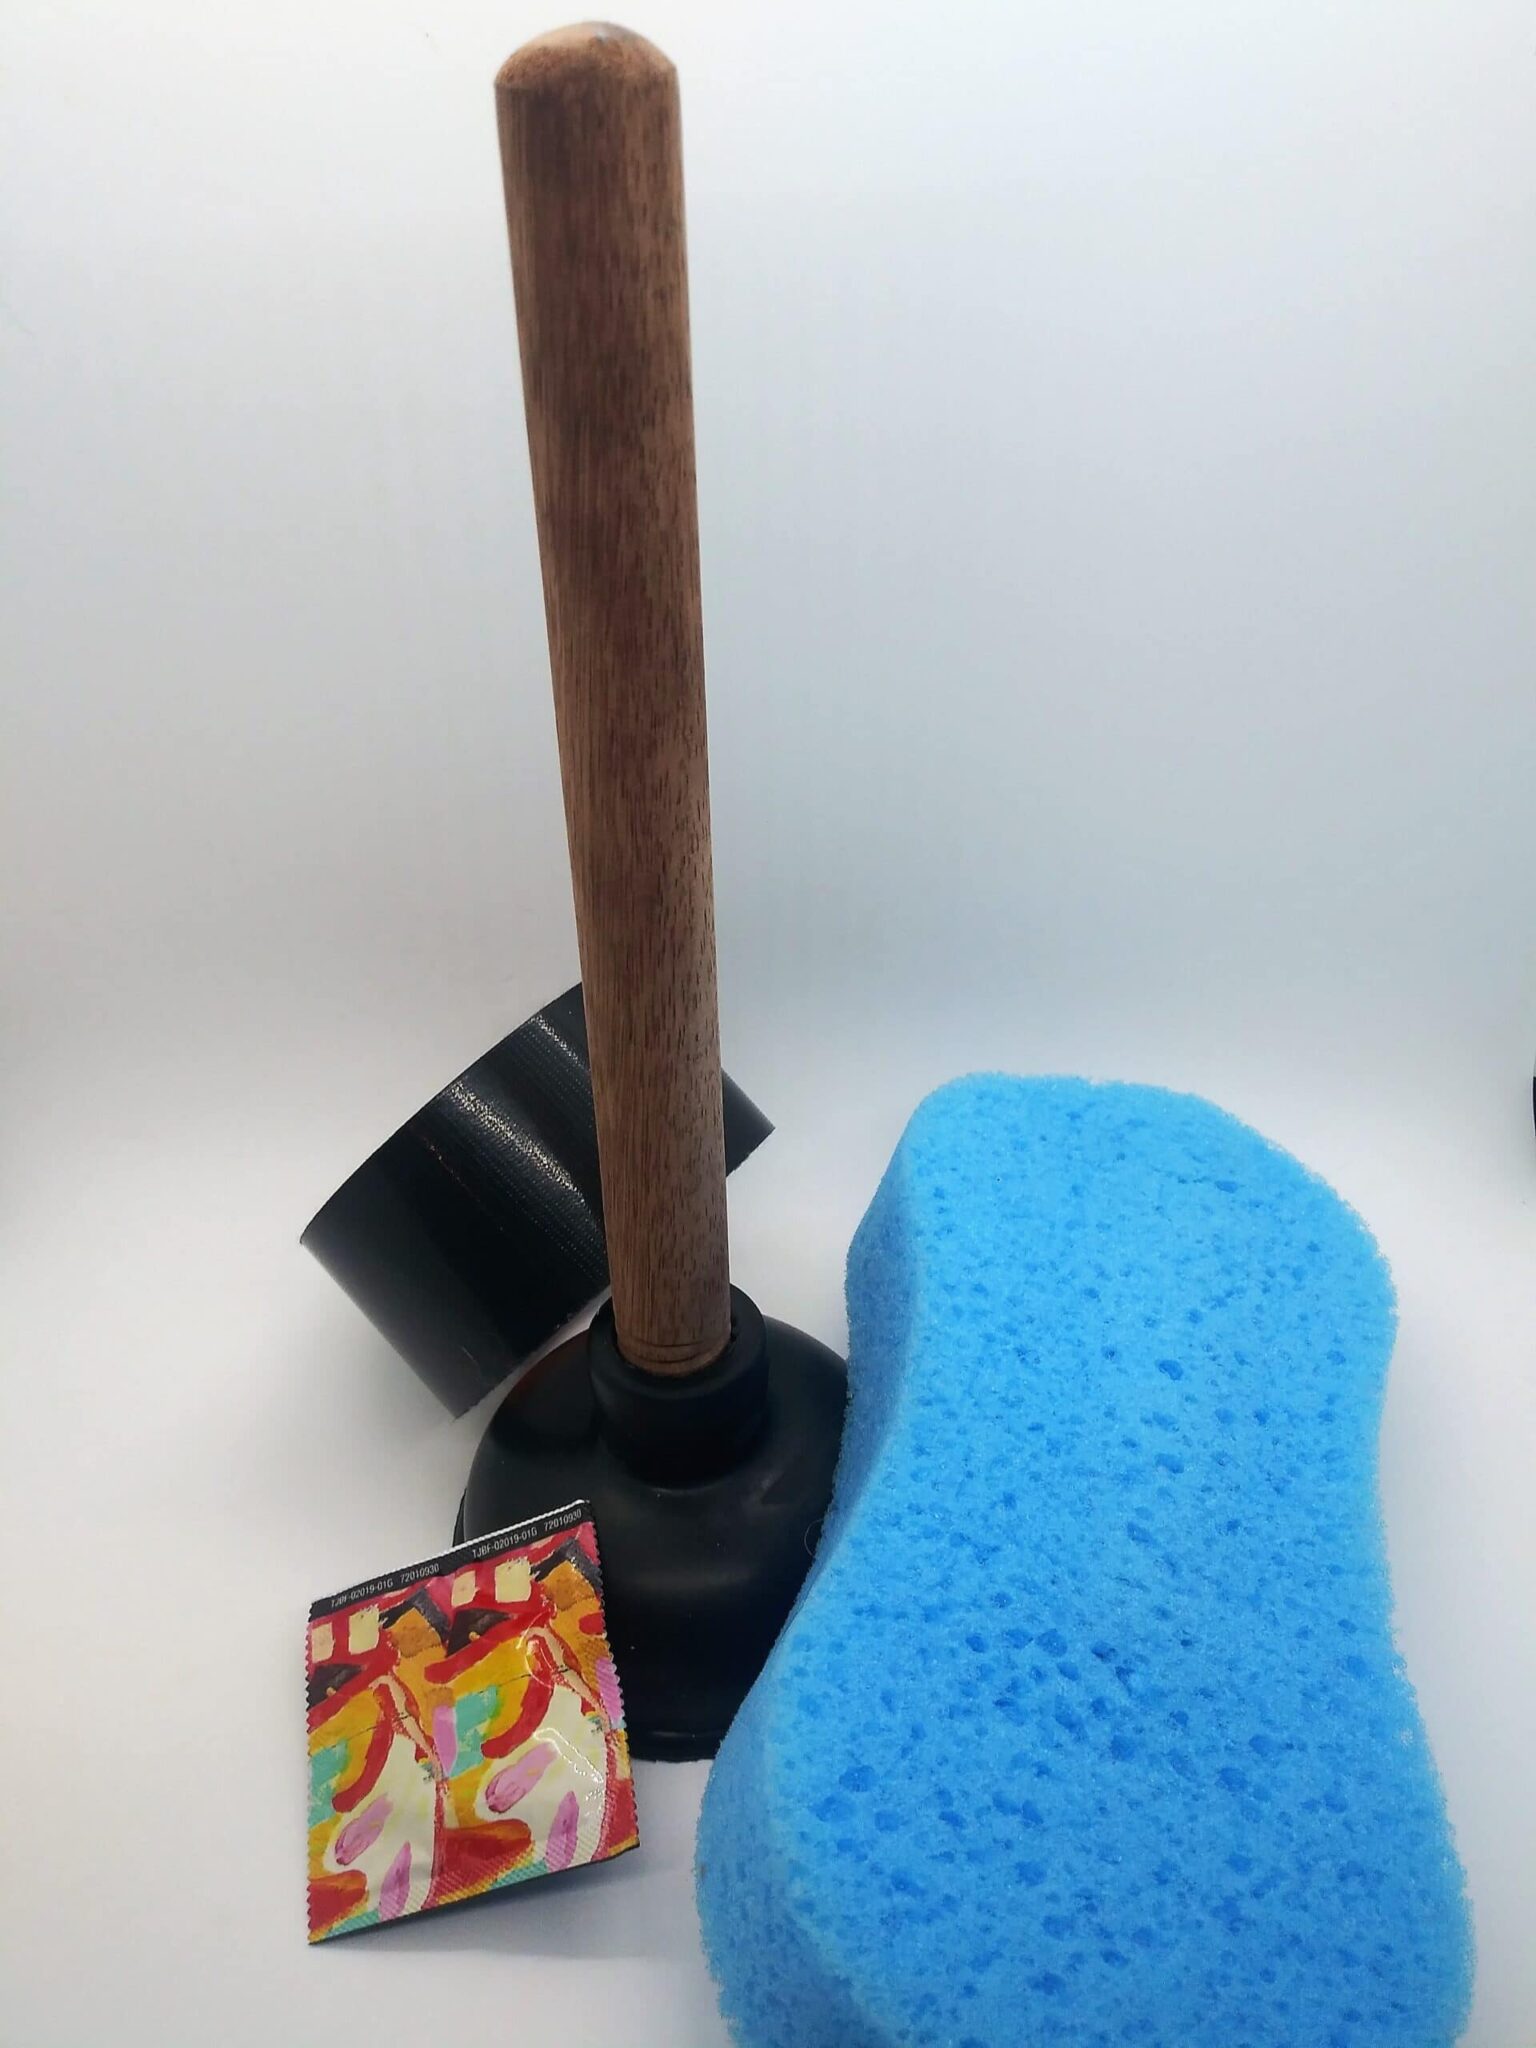 DIY anal toys, making a toy from a sink plunger. Photo of a sink plunger, large sponge, duct tape and a condom.